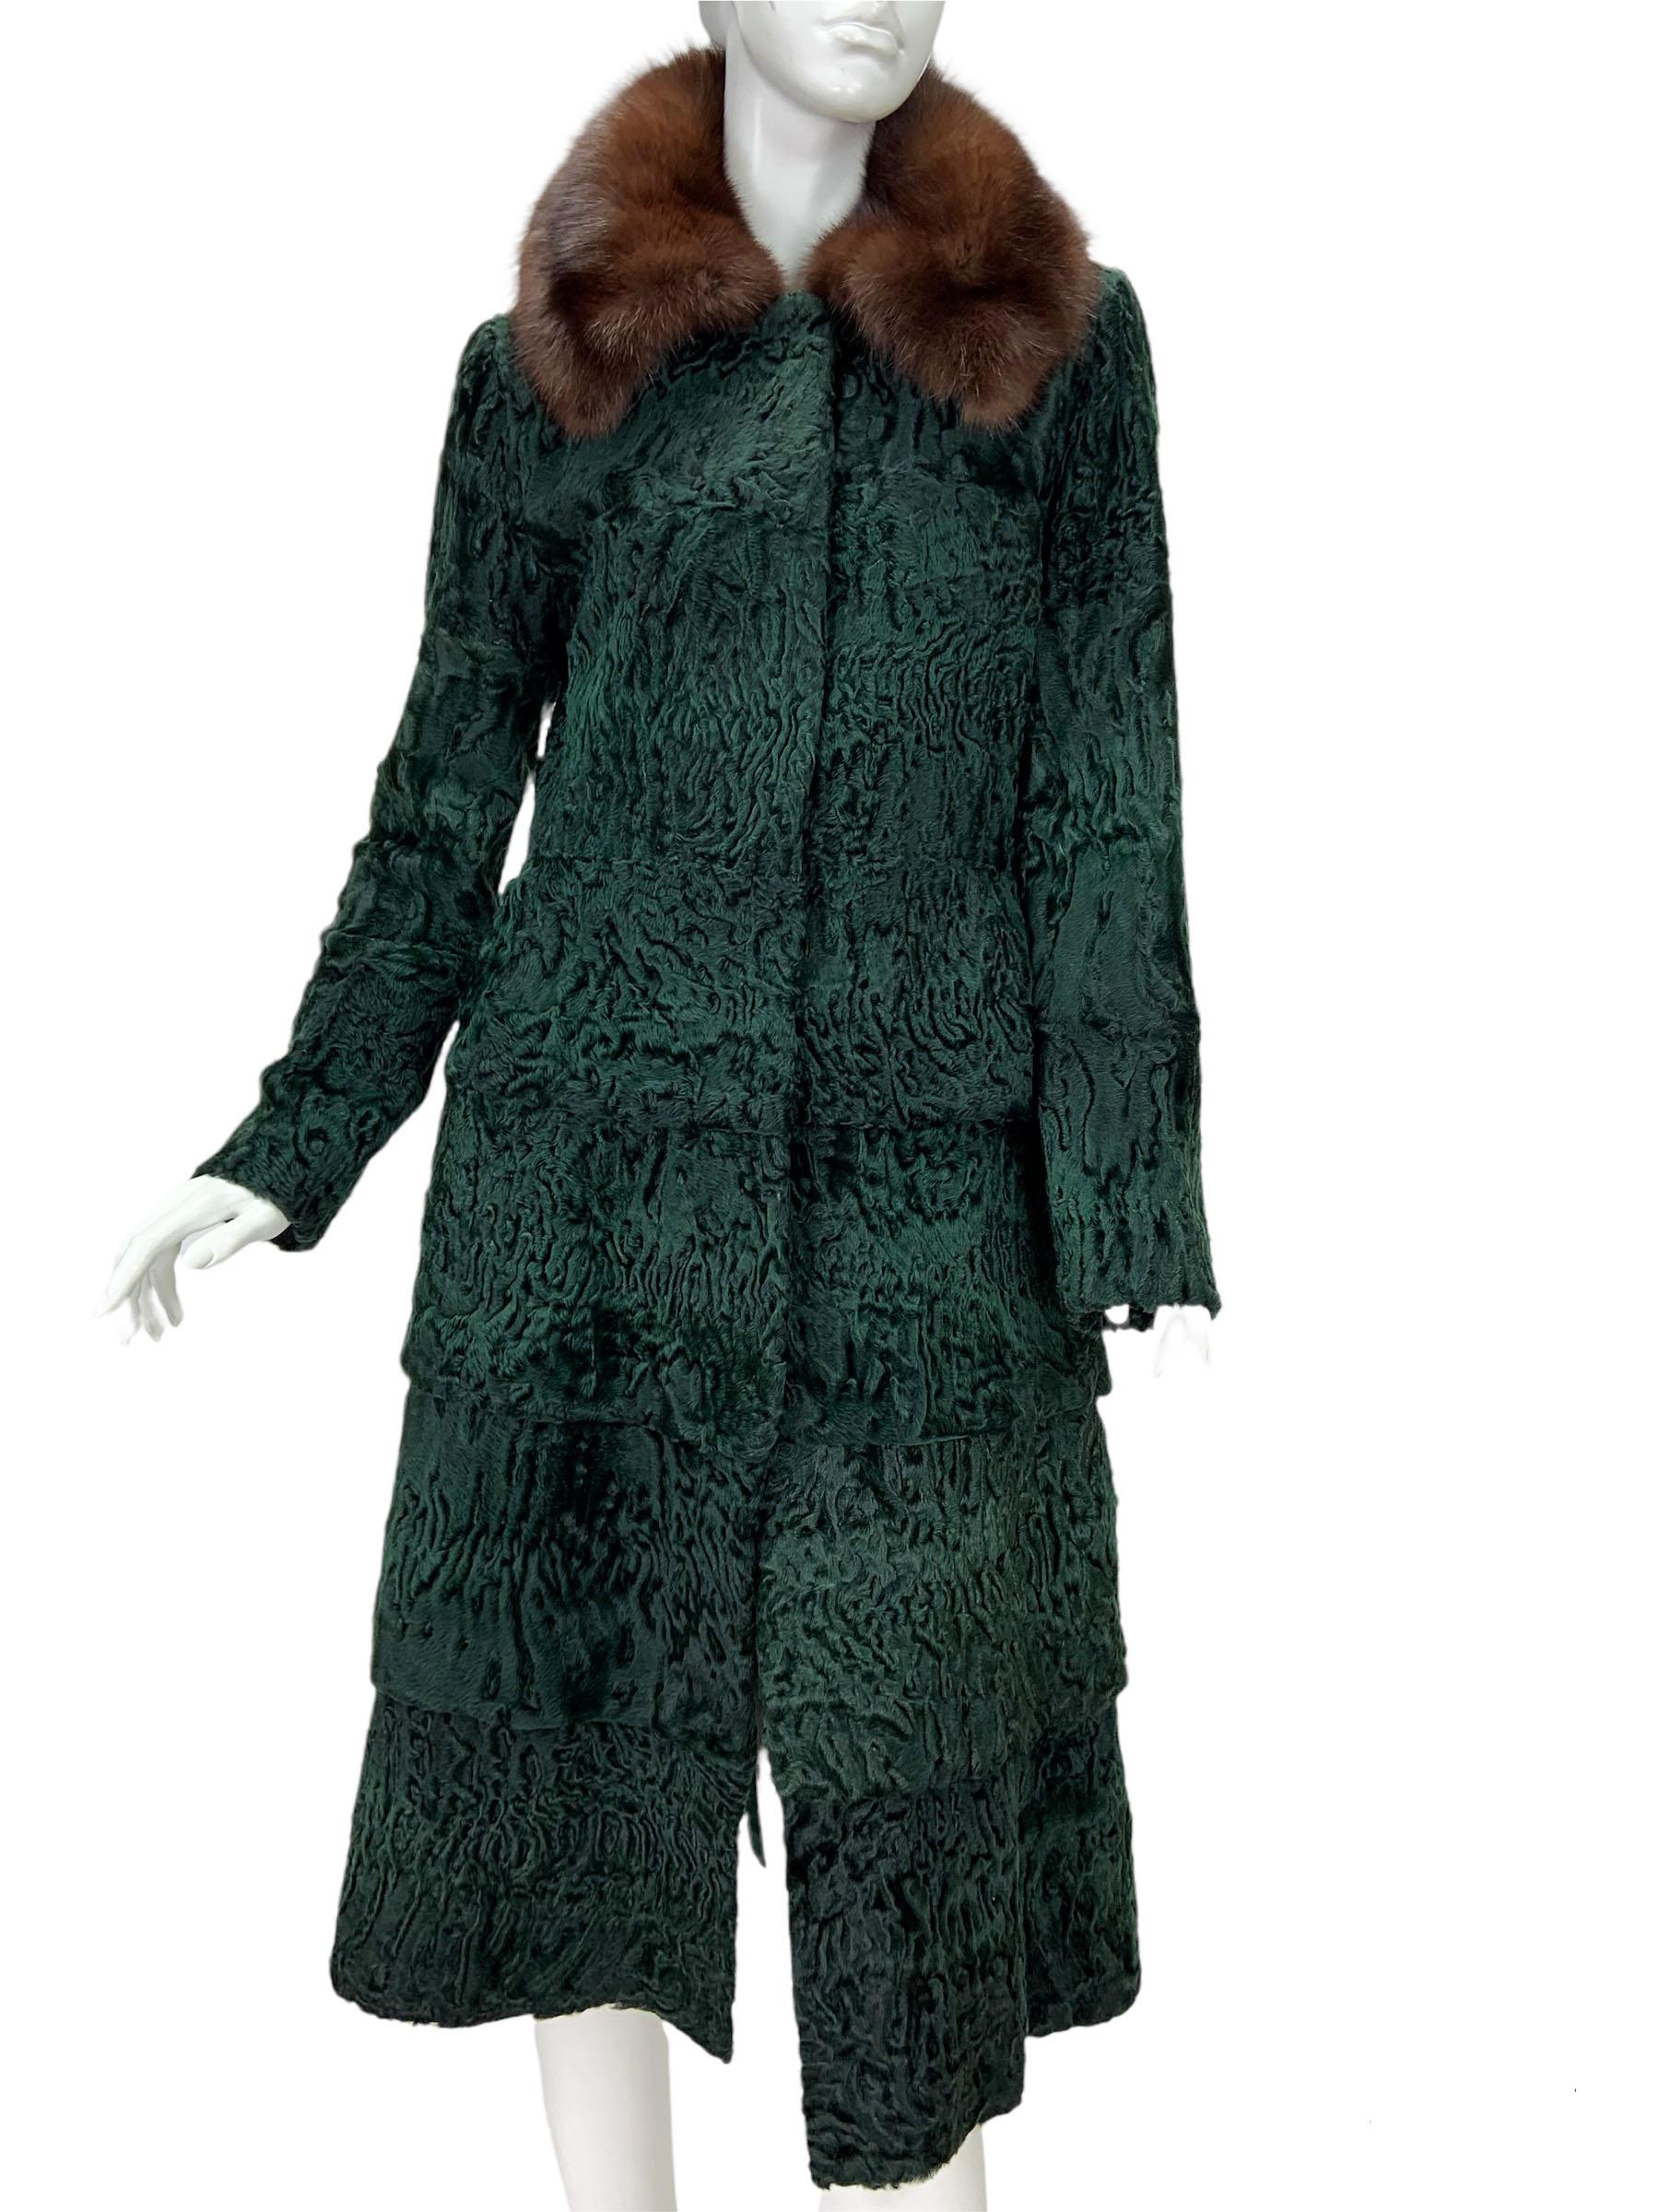 Oscar De La Renta Green Persian Lamb with Russian Sable Collar Coat
F/W 2011 Collection
US size - 4
100% Real Fur - Persian Lamb, Russian Sable Collar, Dark Green Color, A-Line Style with Layered Skirt, Hook and Eye Closure, Fully Lined, Personal